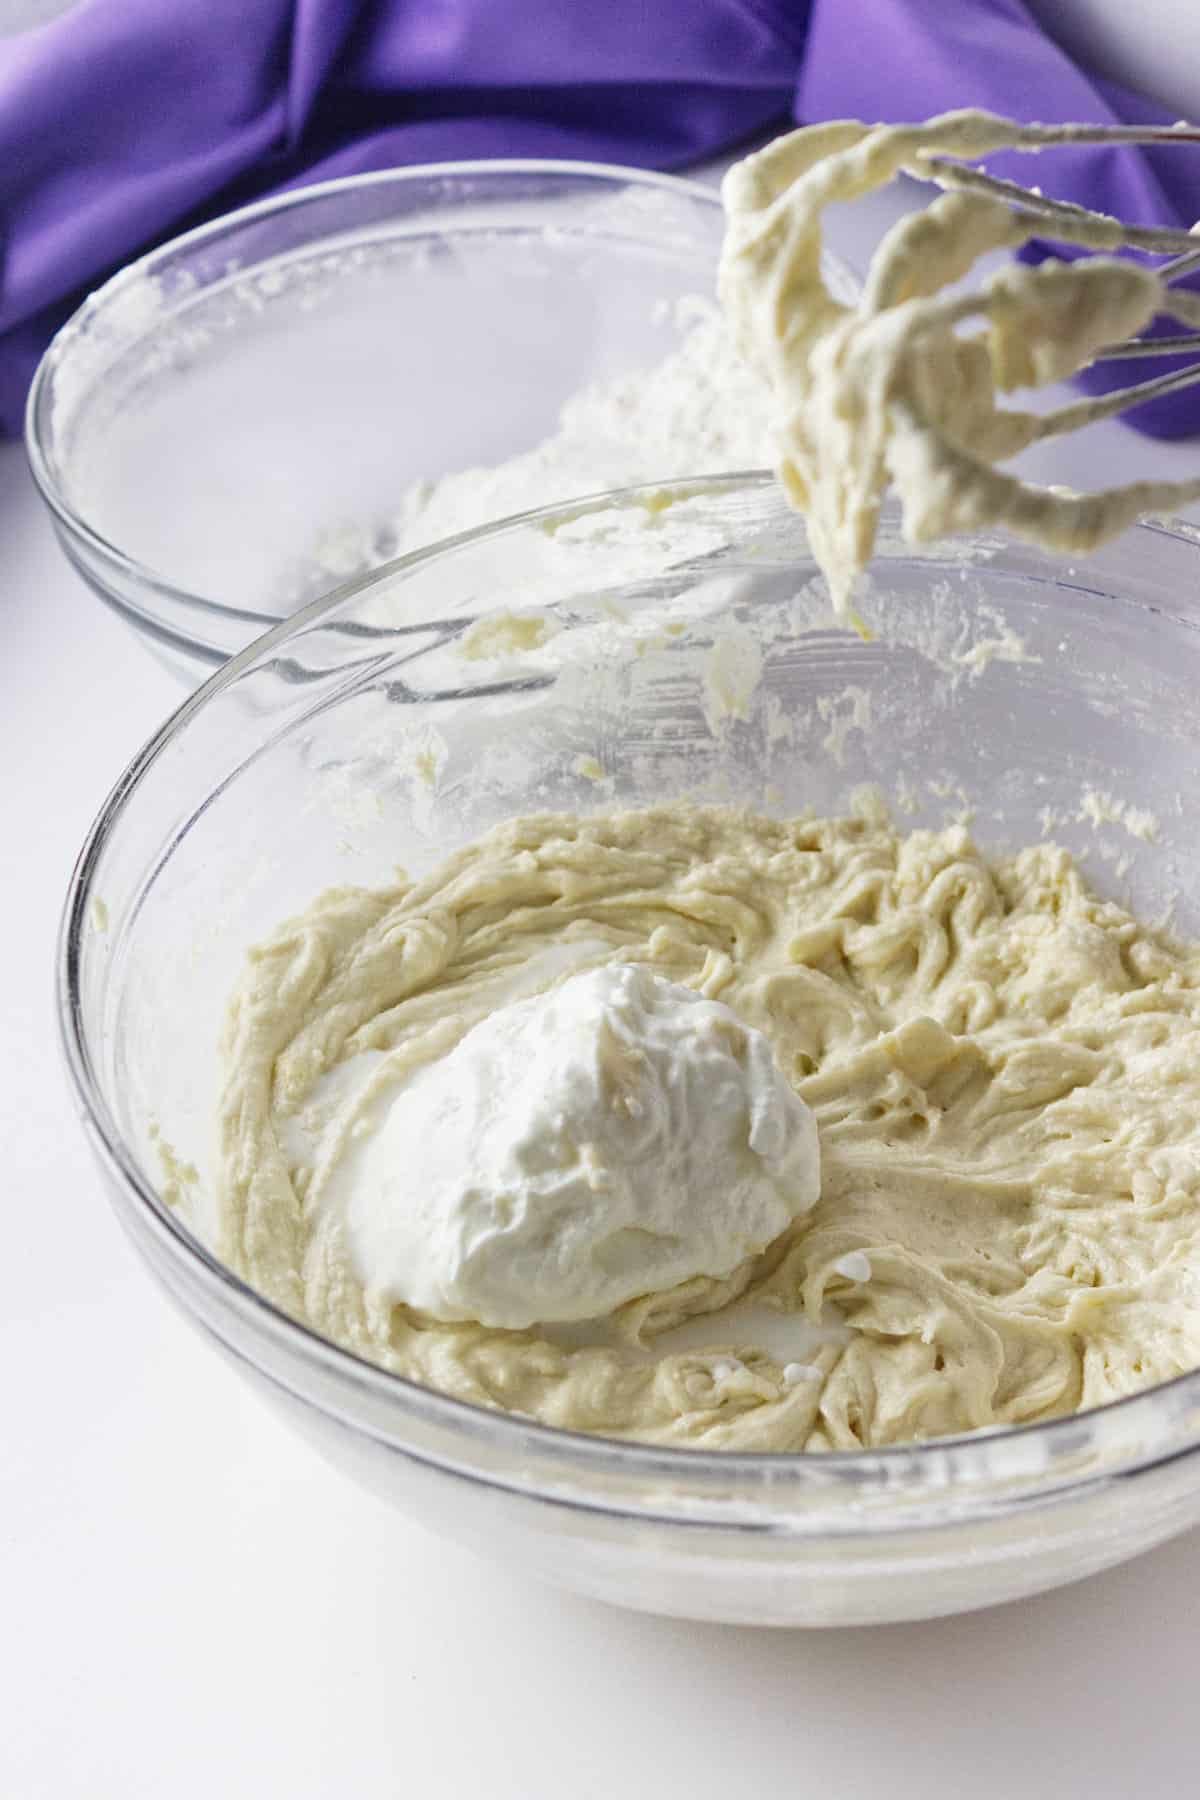 batter being mixed with sour cream.